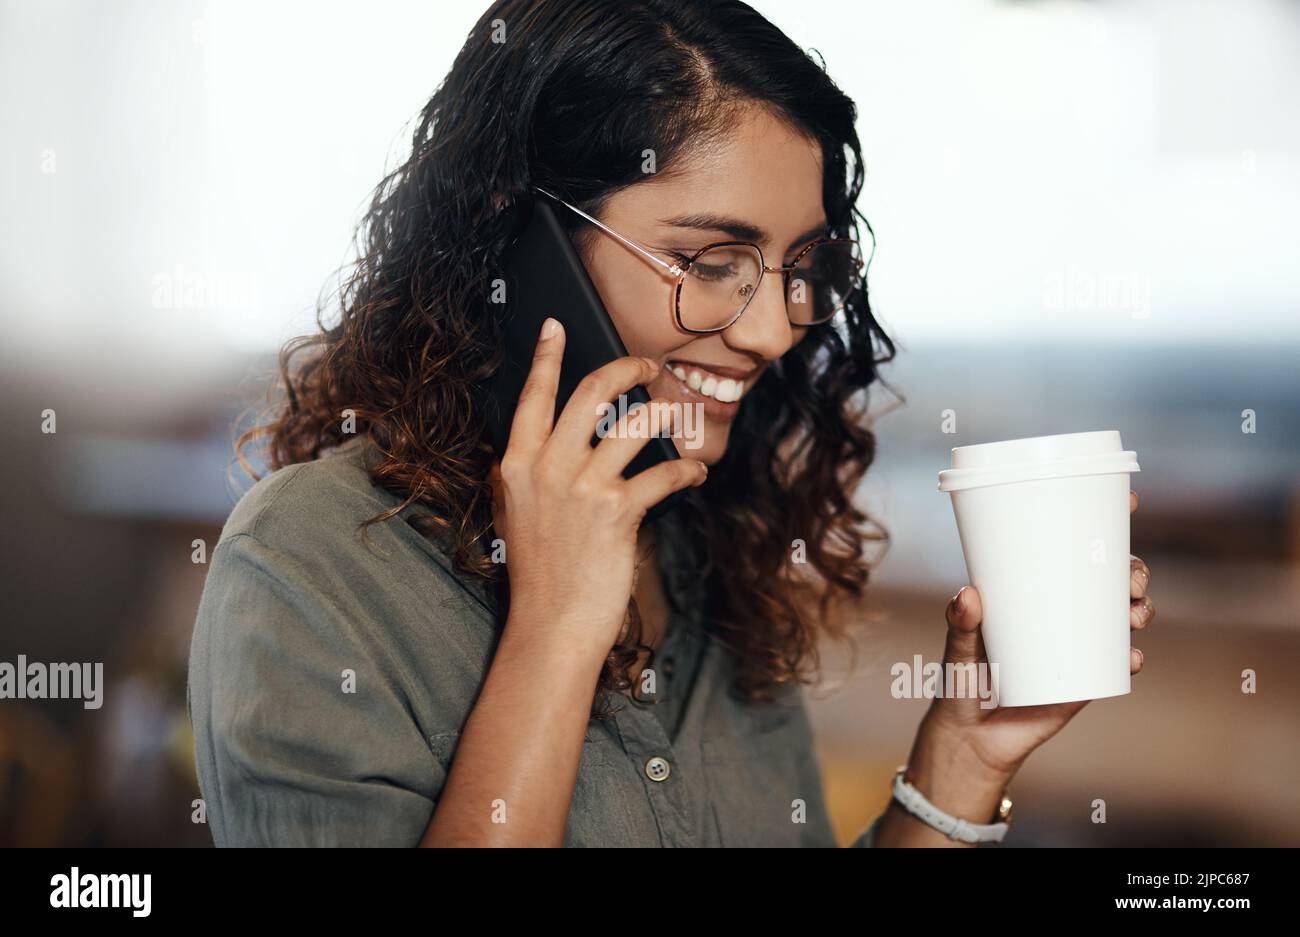 Young woman talking on her phone, drinking coffee, and smiling in cafe shop. Lady wearing glasses, using technology to network and connect while Stock Photo